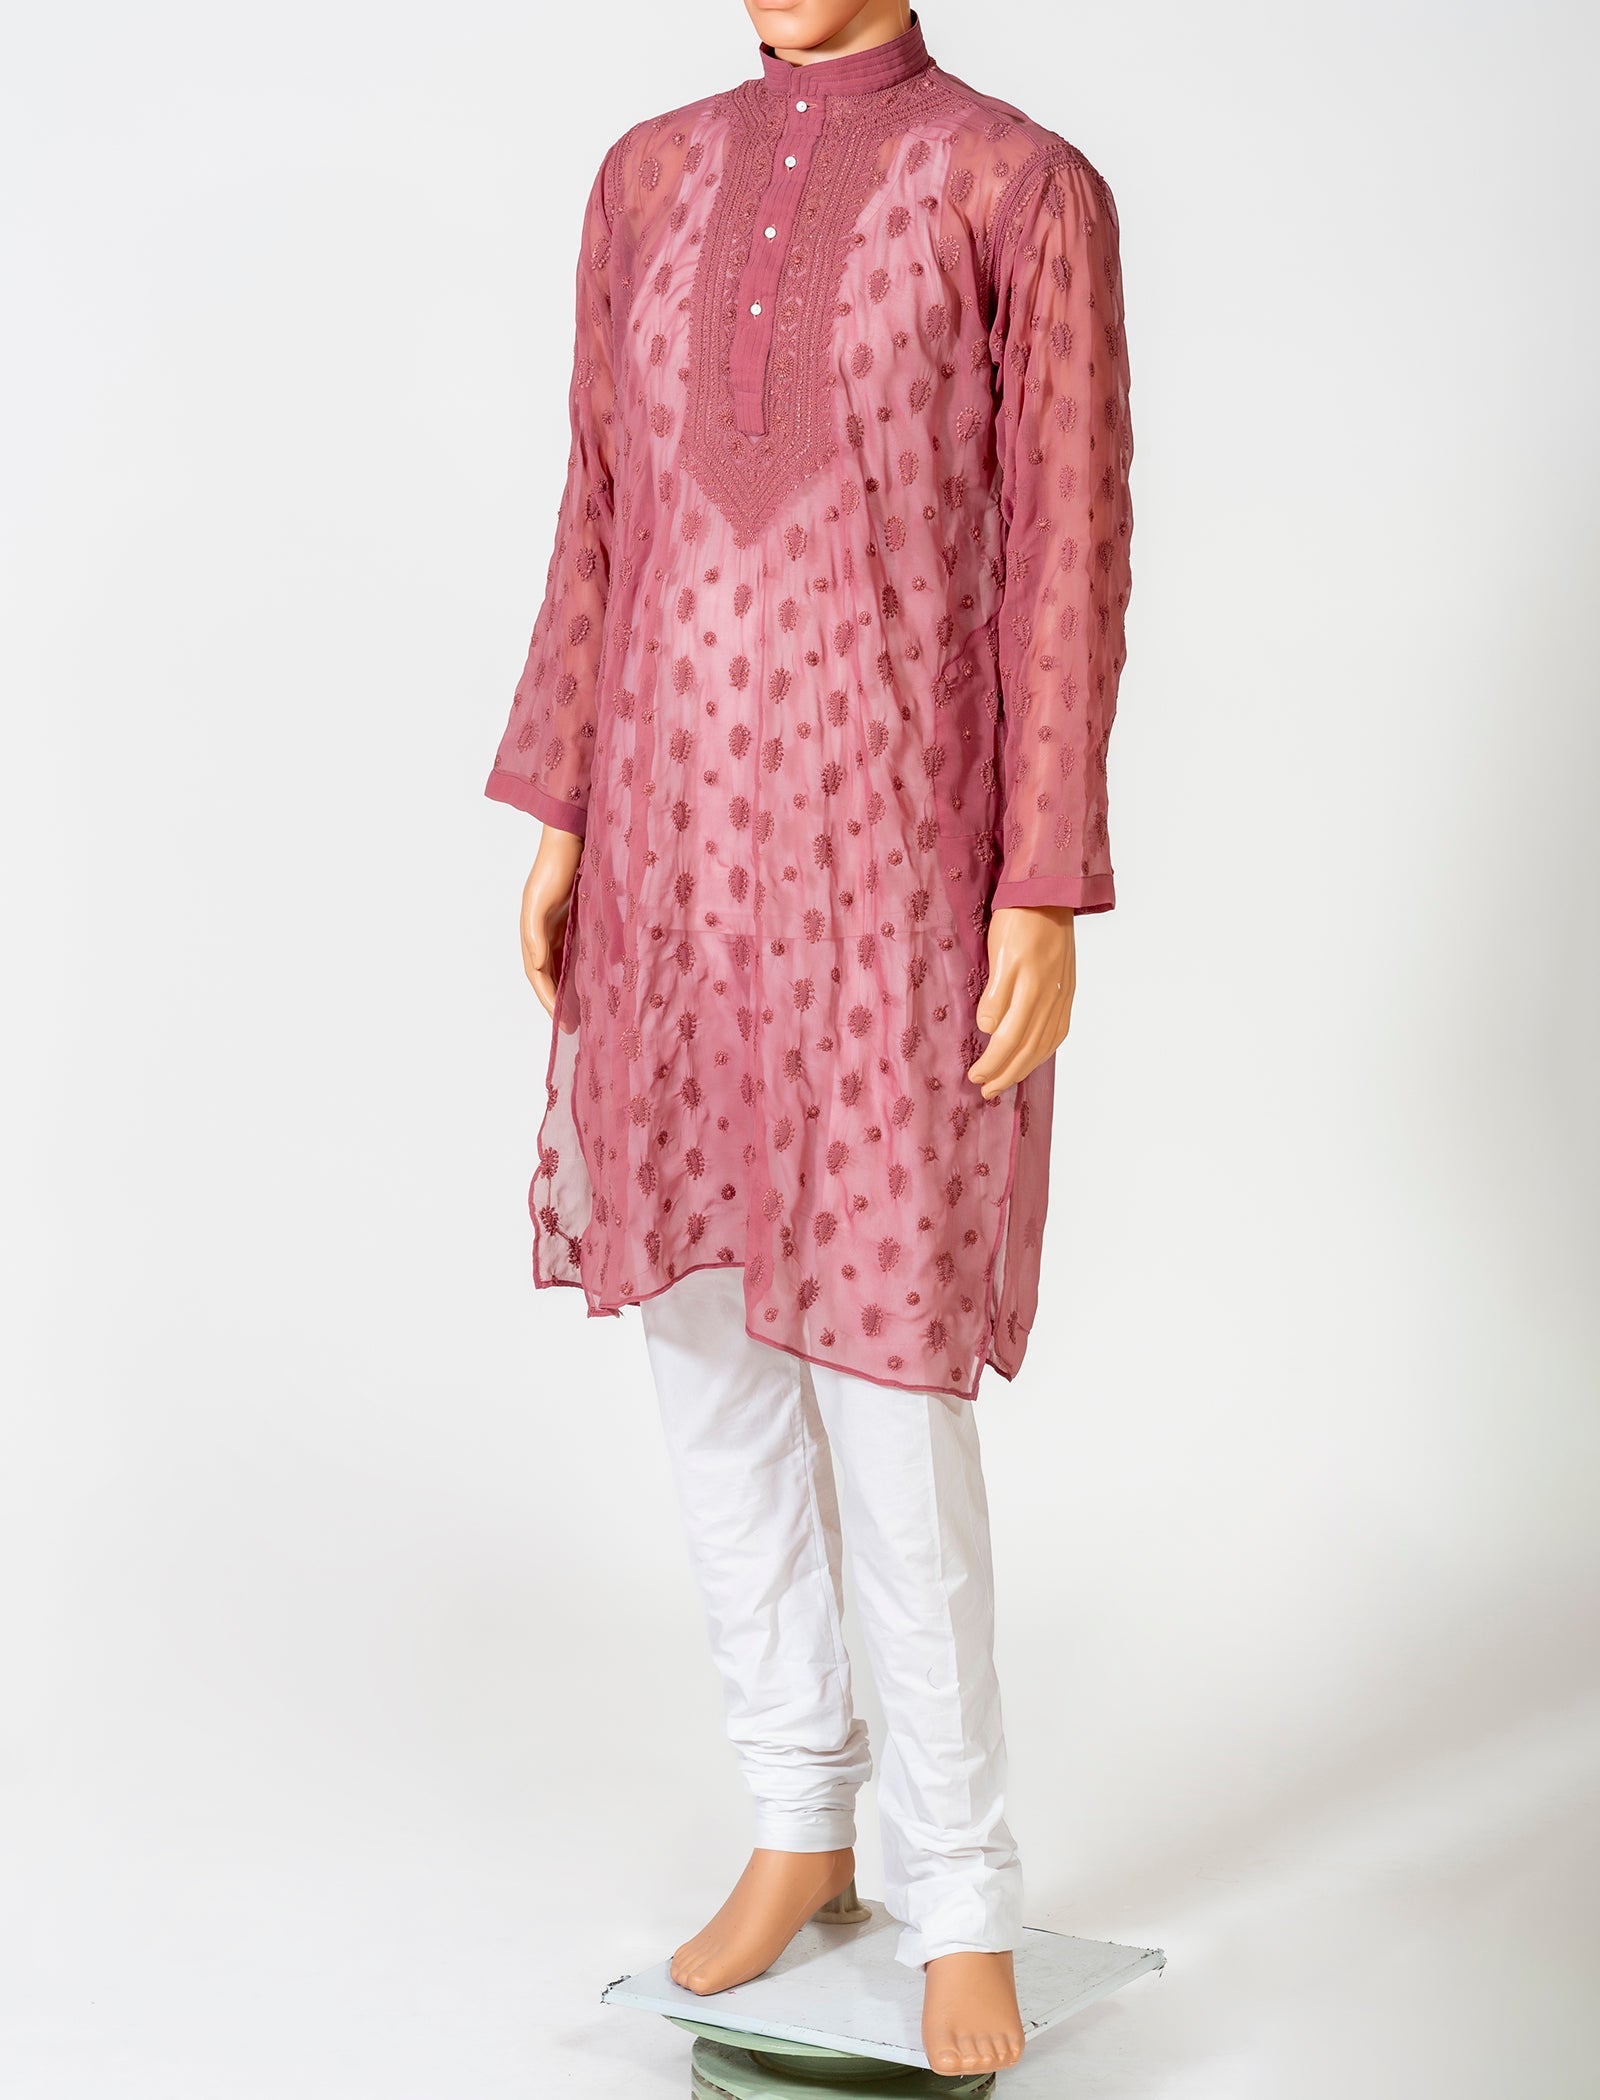 Lucknow Chikan Emporium Georgette Purple Colour Gents Kurta With Self Stripes And Fancy Hand Chikankari On Neck.